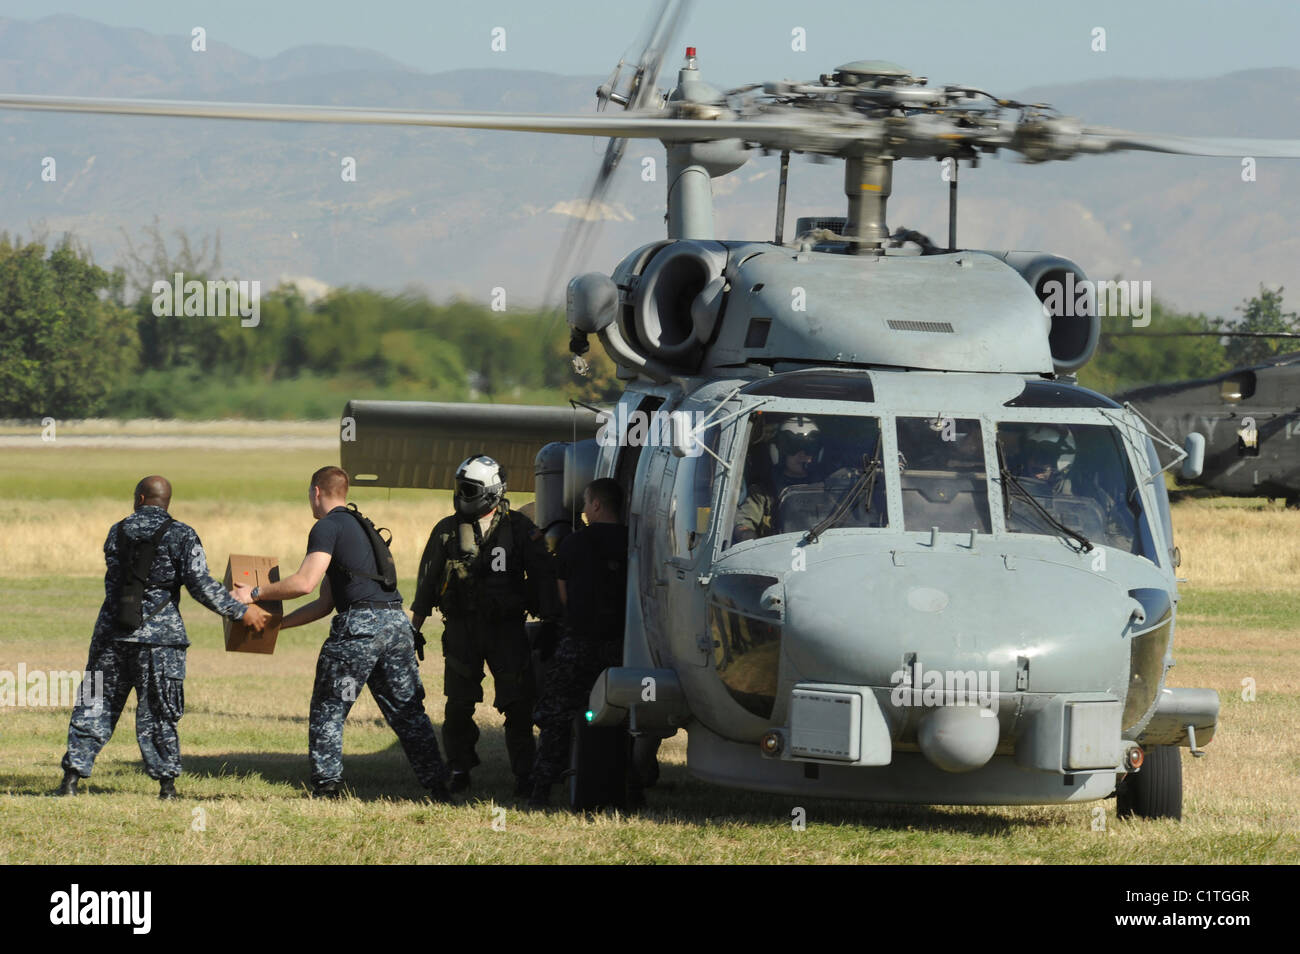 U.S. Navy sailors load humanitarian supplies onto a Navy HH-60 Pave Hawk helicopter. Stock Photo